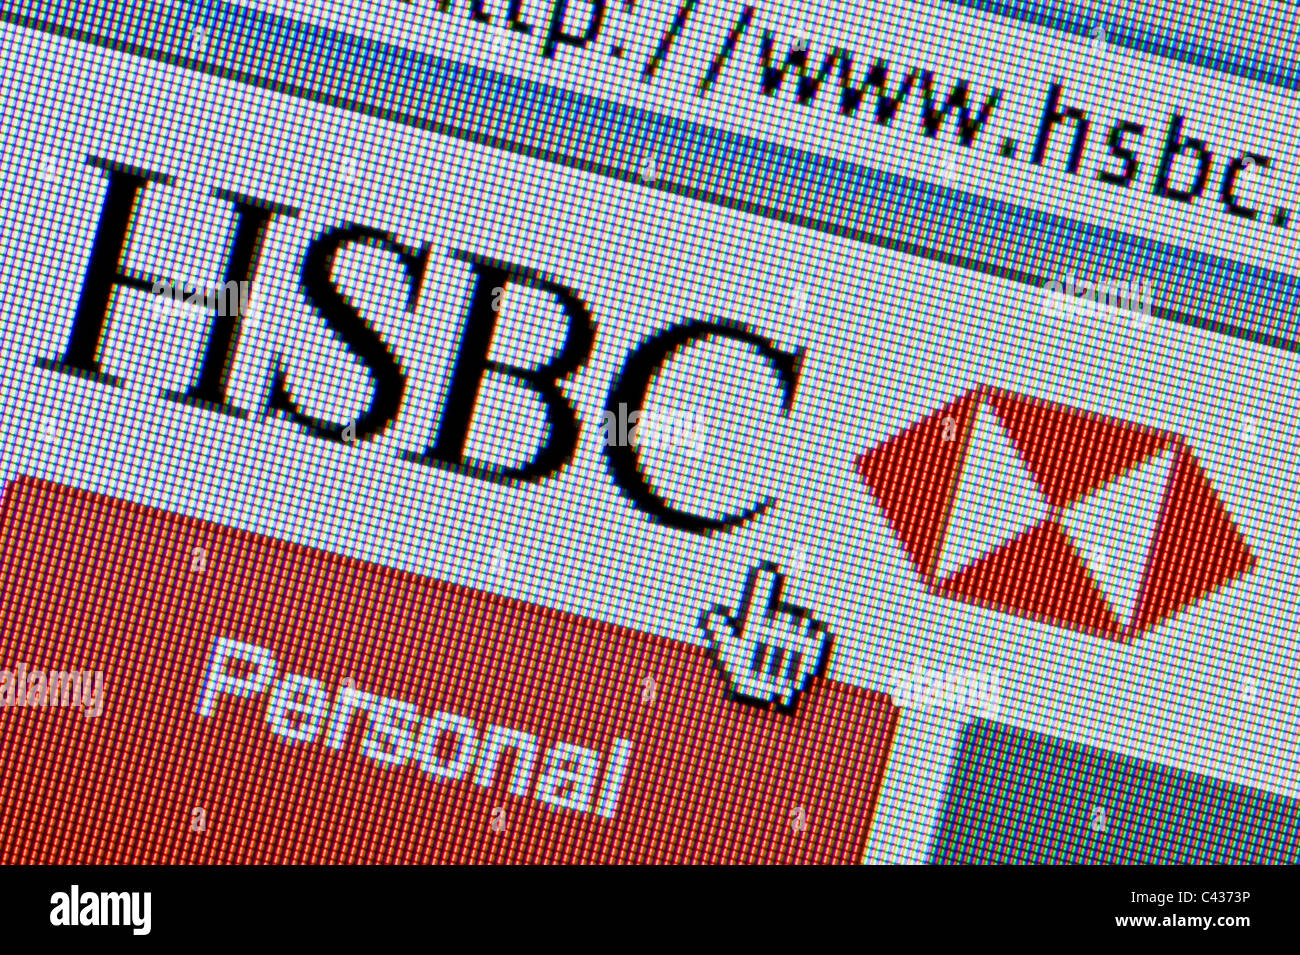 Close up of the HSBC logo as seen on its website. (Editorial use only: print, TV, e-book and editorial website). Stock Photo